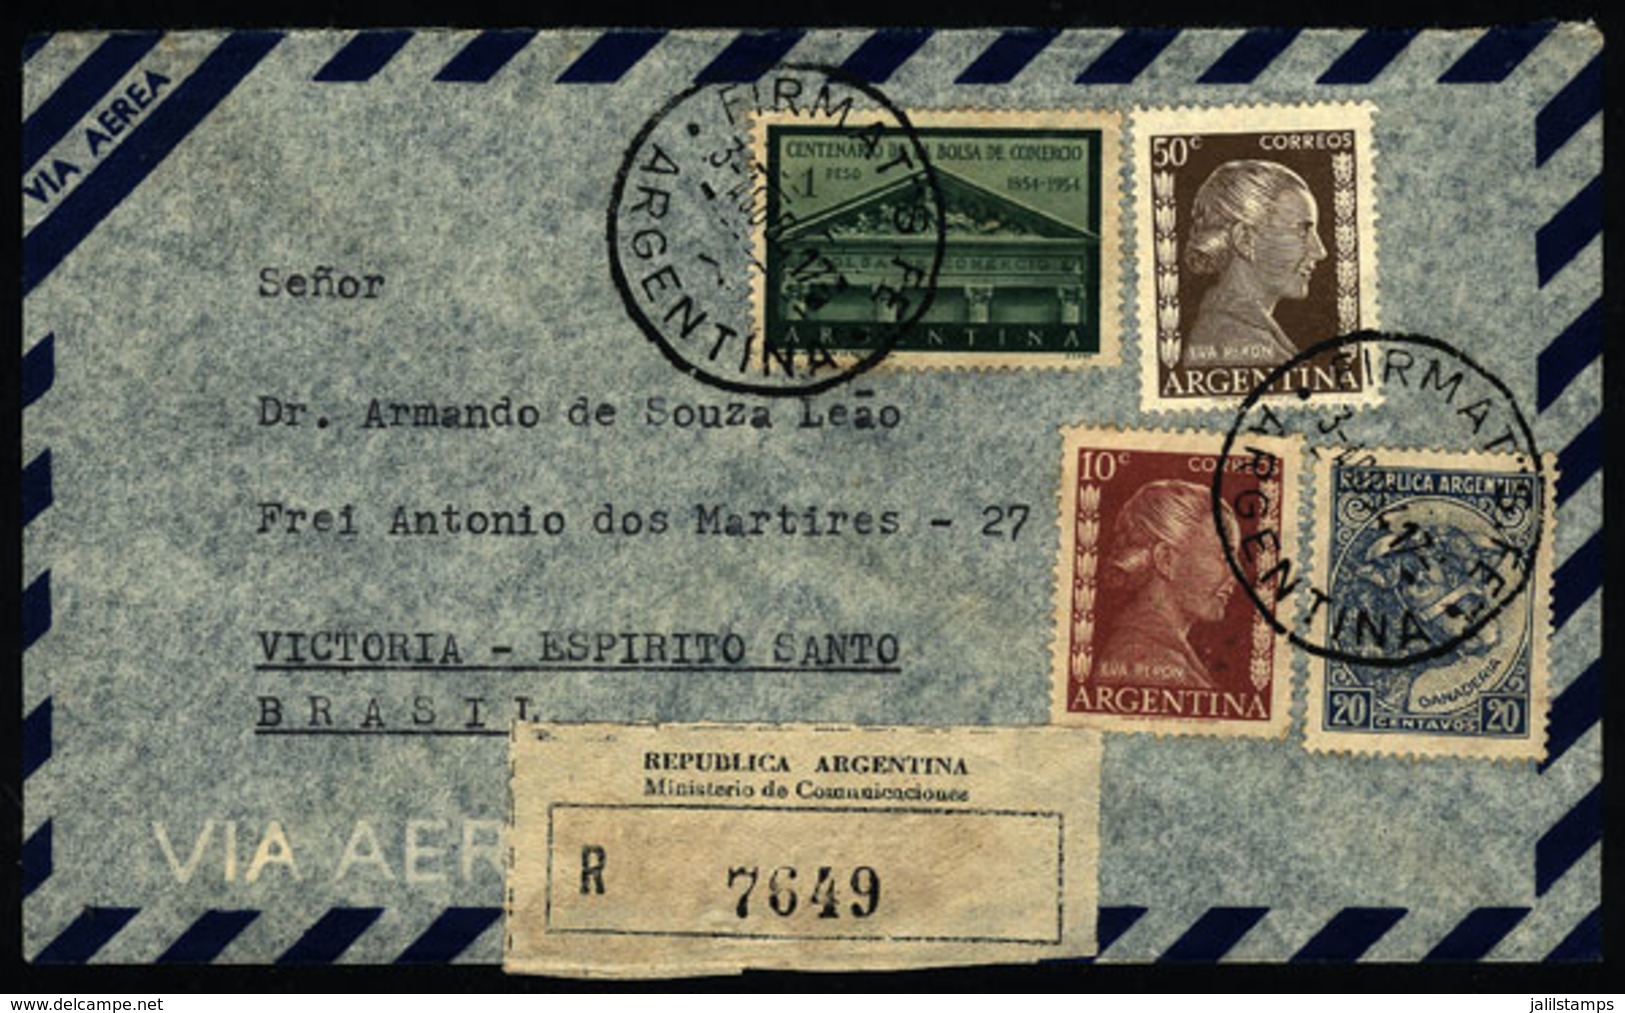 ARGENTINA: Airmail Cover Mailed On 3/AU/1954 With Postmark Of "FIRMAT" (Santa Fe) To Victoria (Brazil), VF Quality" - Covers & Documents